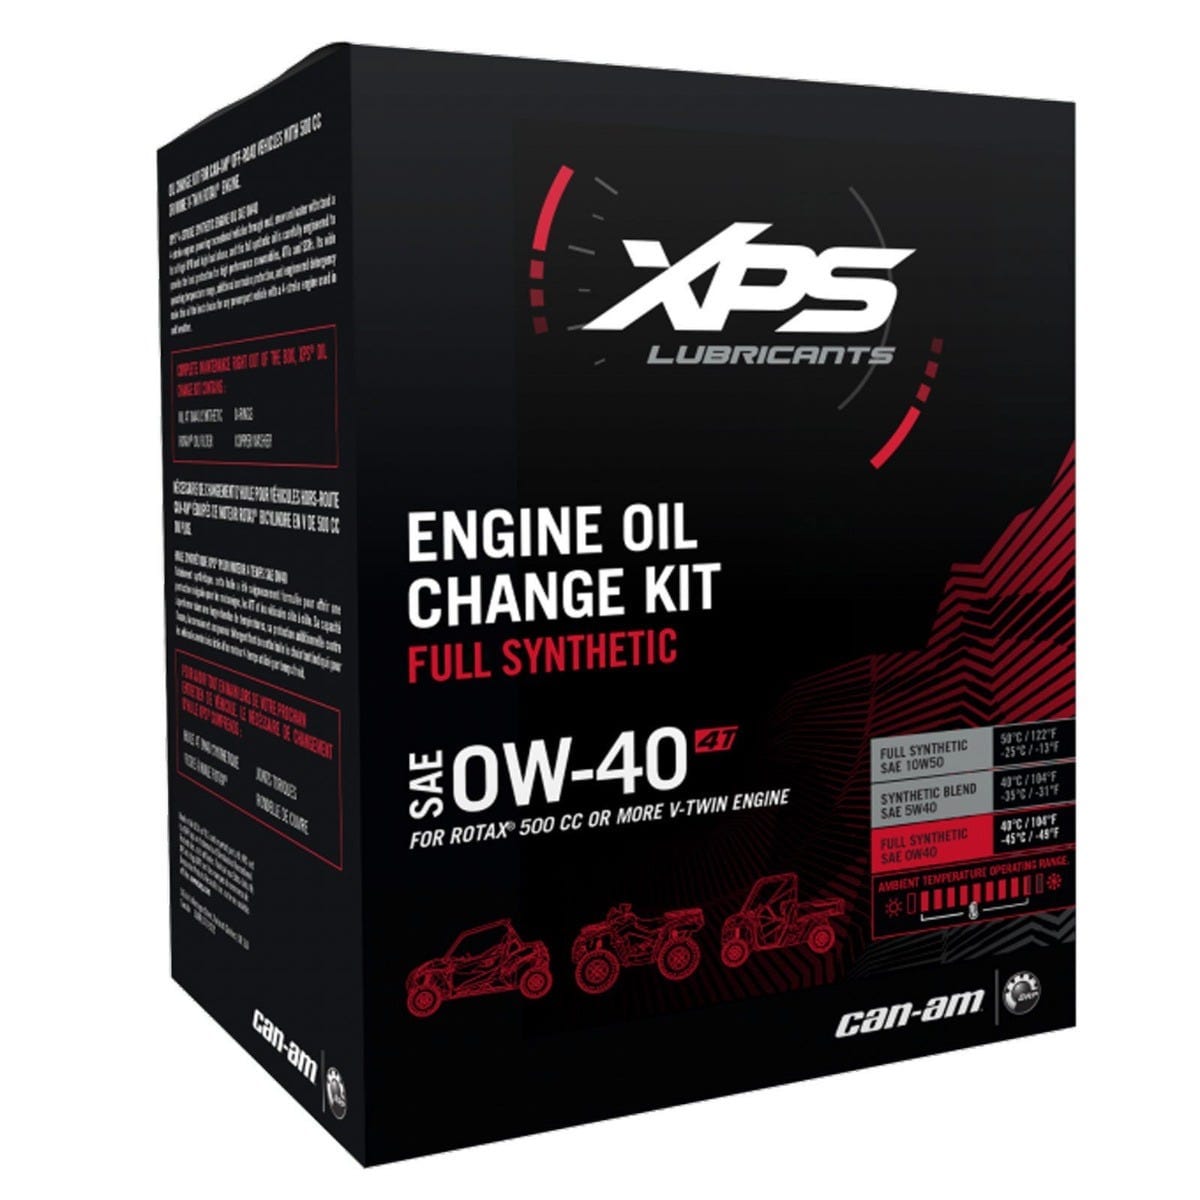 4T 0W-40 Synthetic Oil Change Kit for Rotax 500 cc or more V-Twin engine